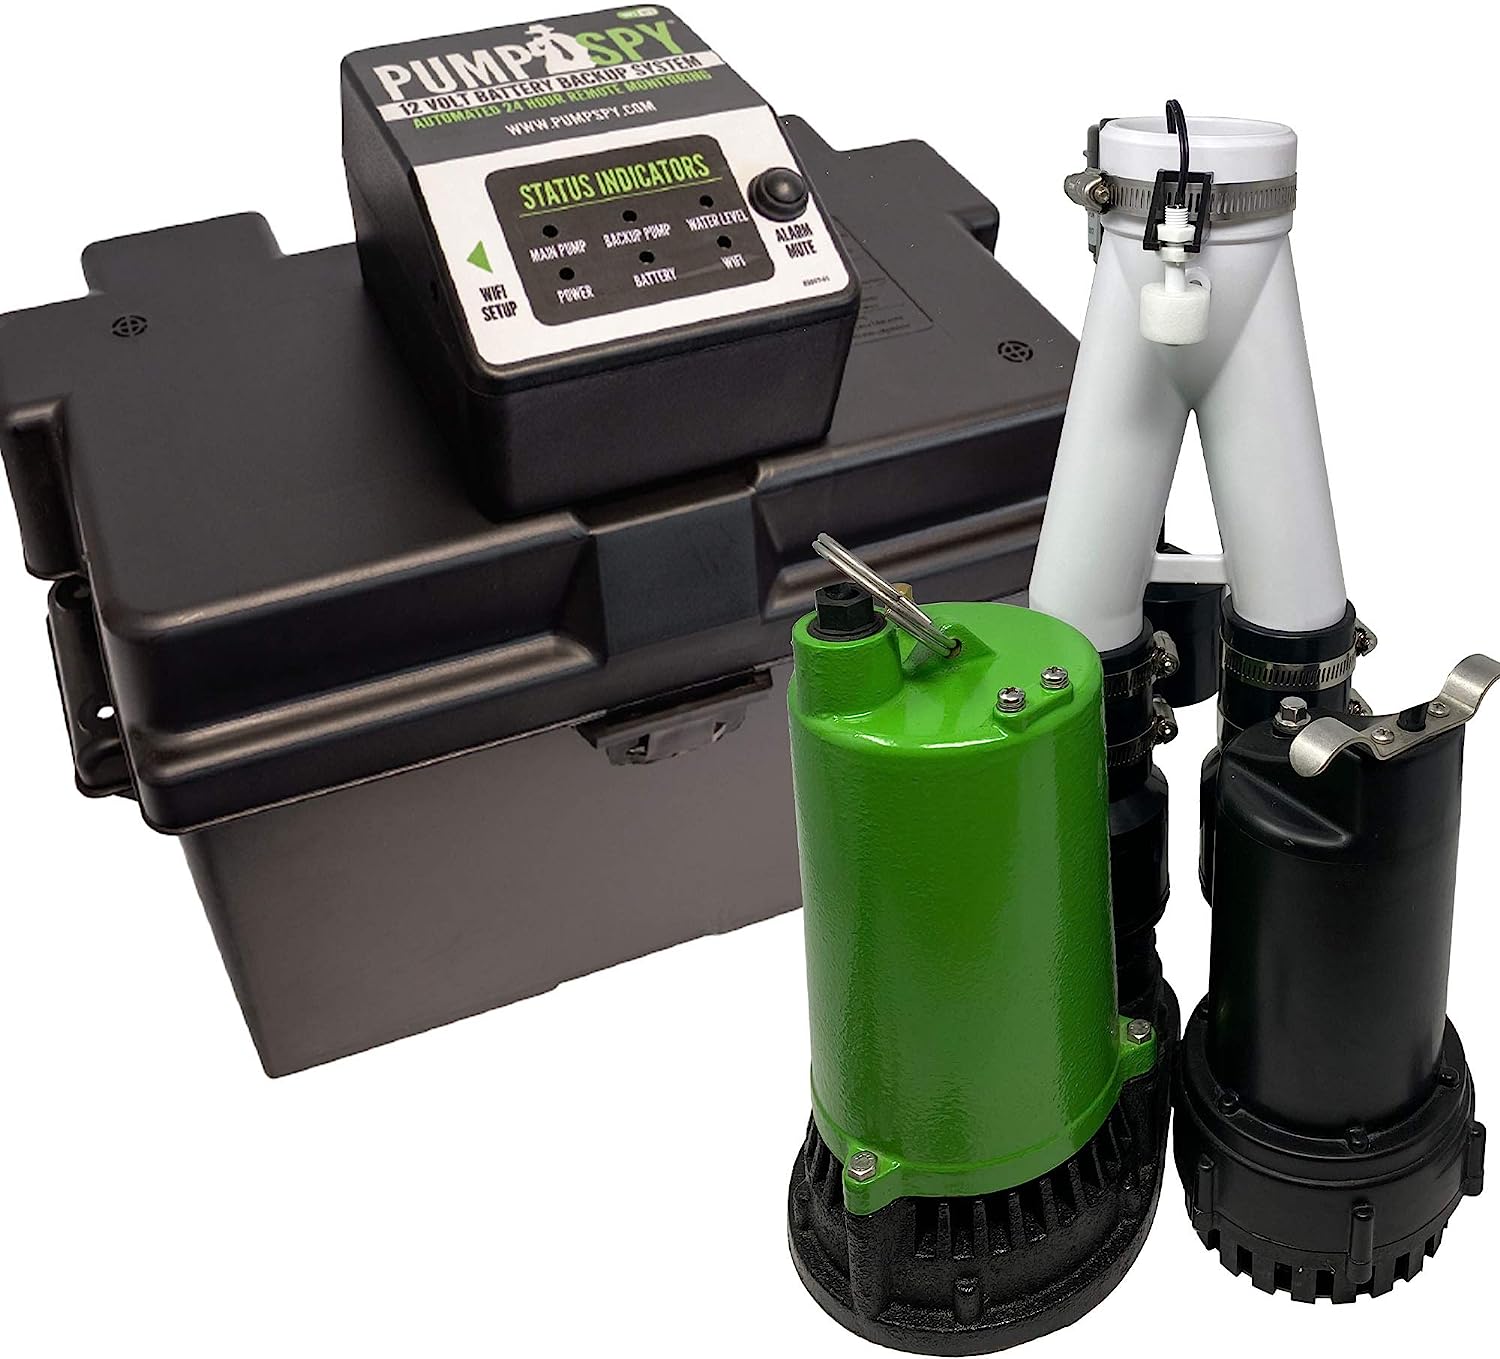 battery backup for existing sump pump detailed review